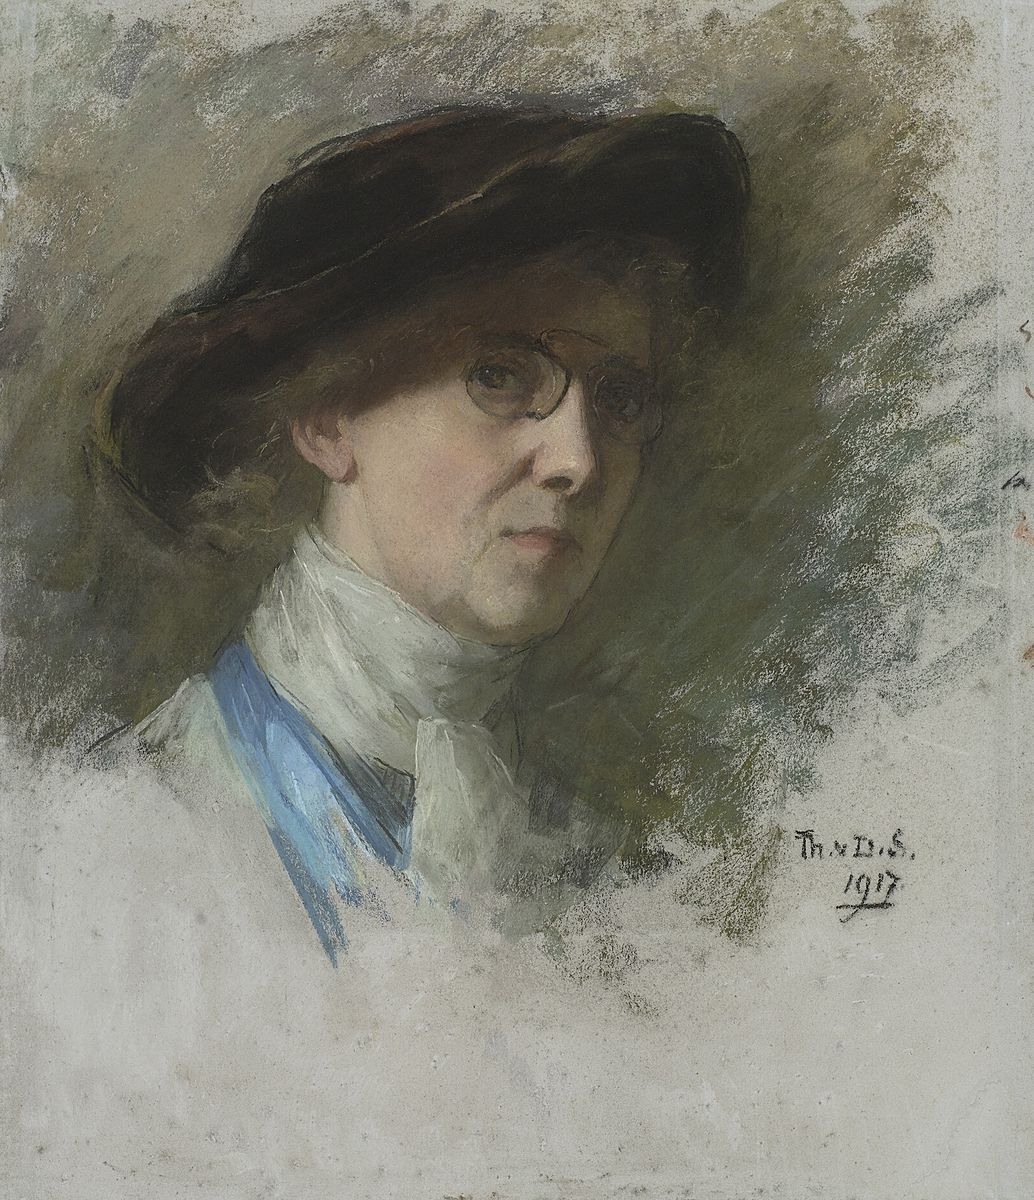 Self-portrait with black hat and glasses, 1917	 Pastel on paper, 55 cm x 47 cm	 Rijksmuseum, Amsterdam View full size